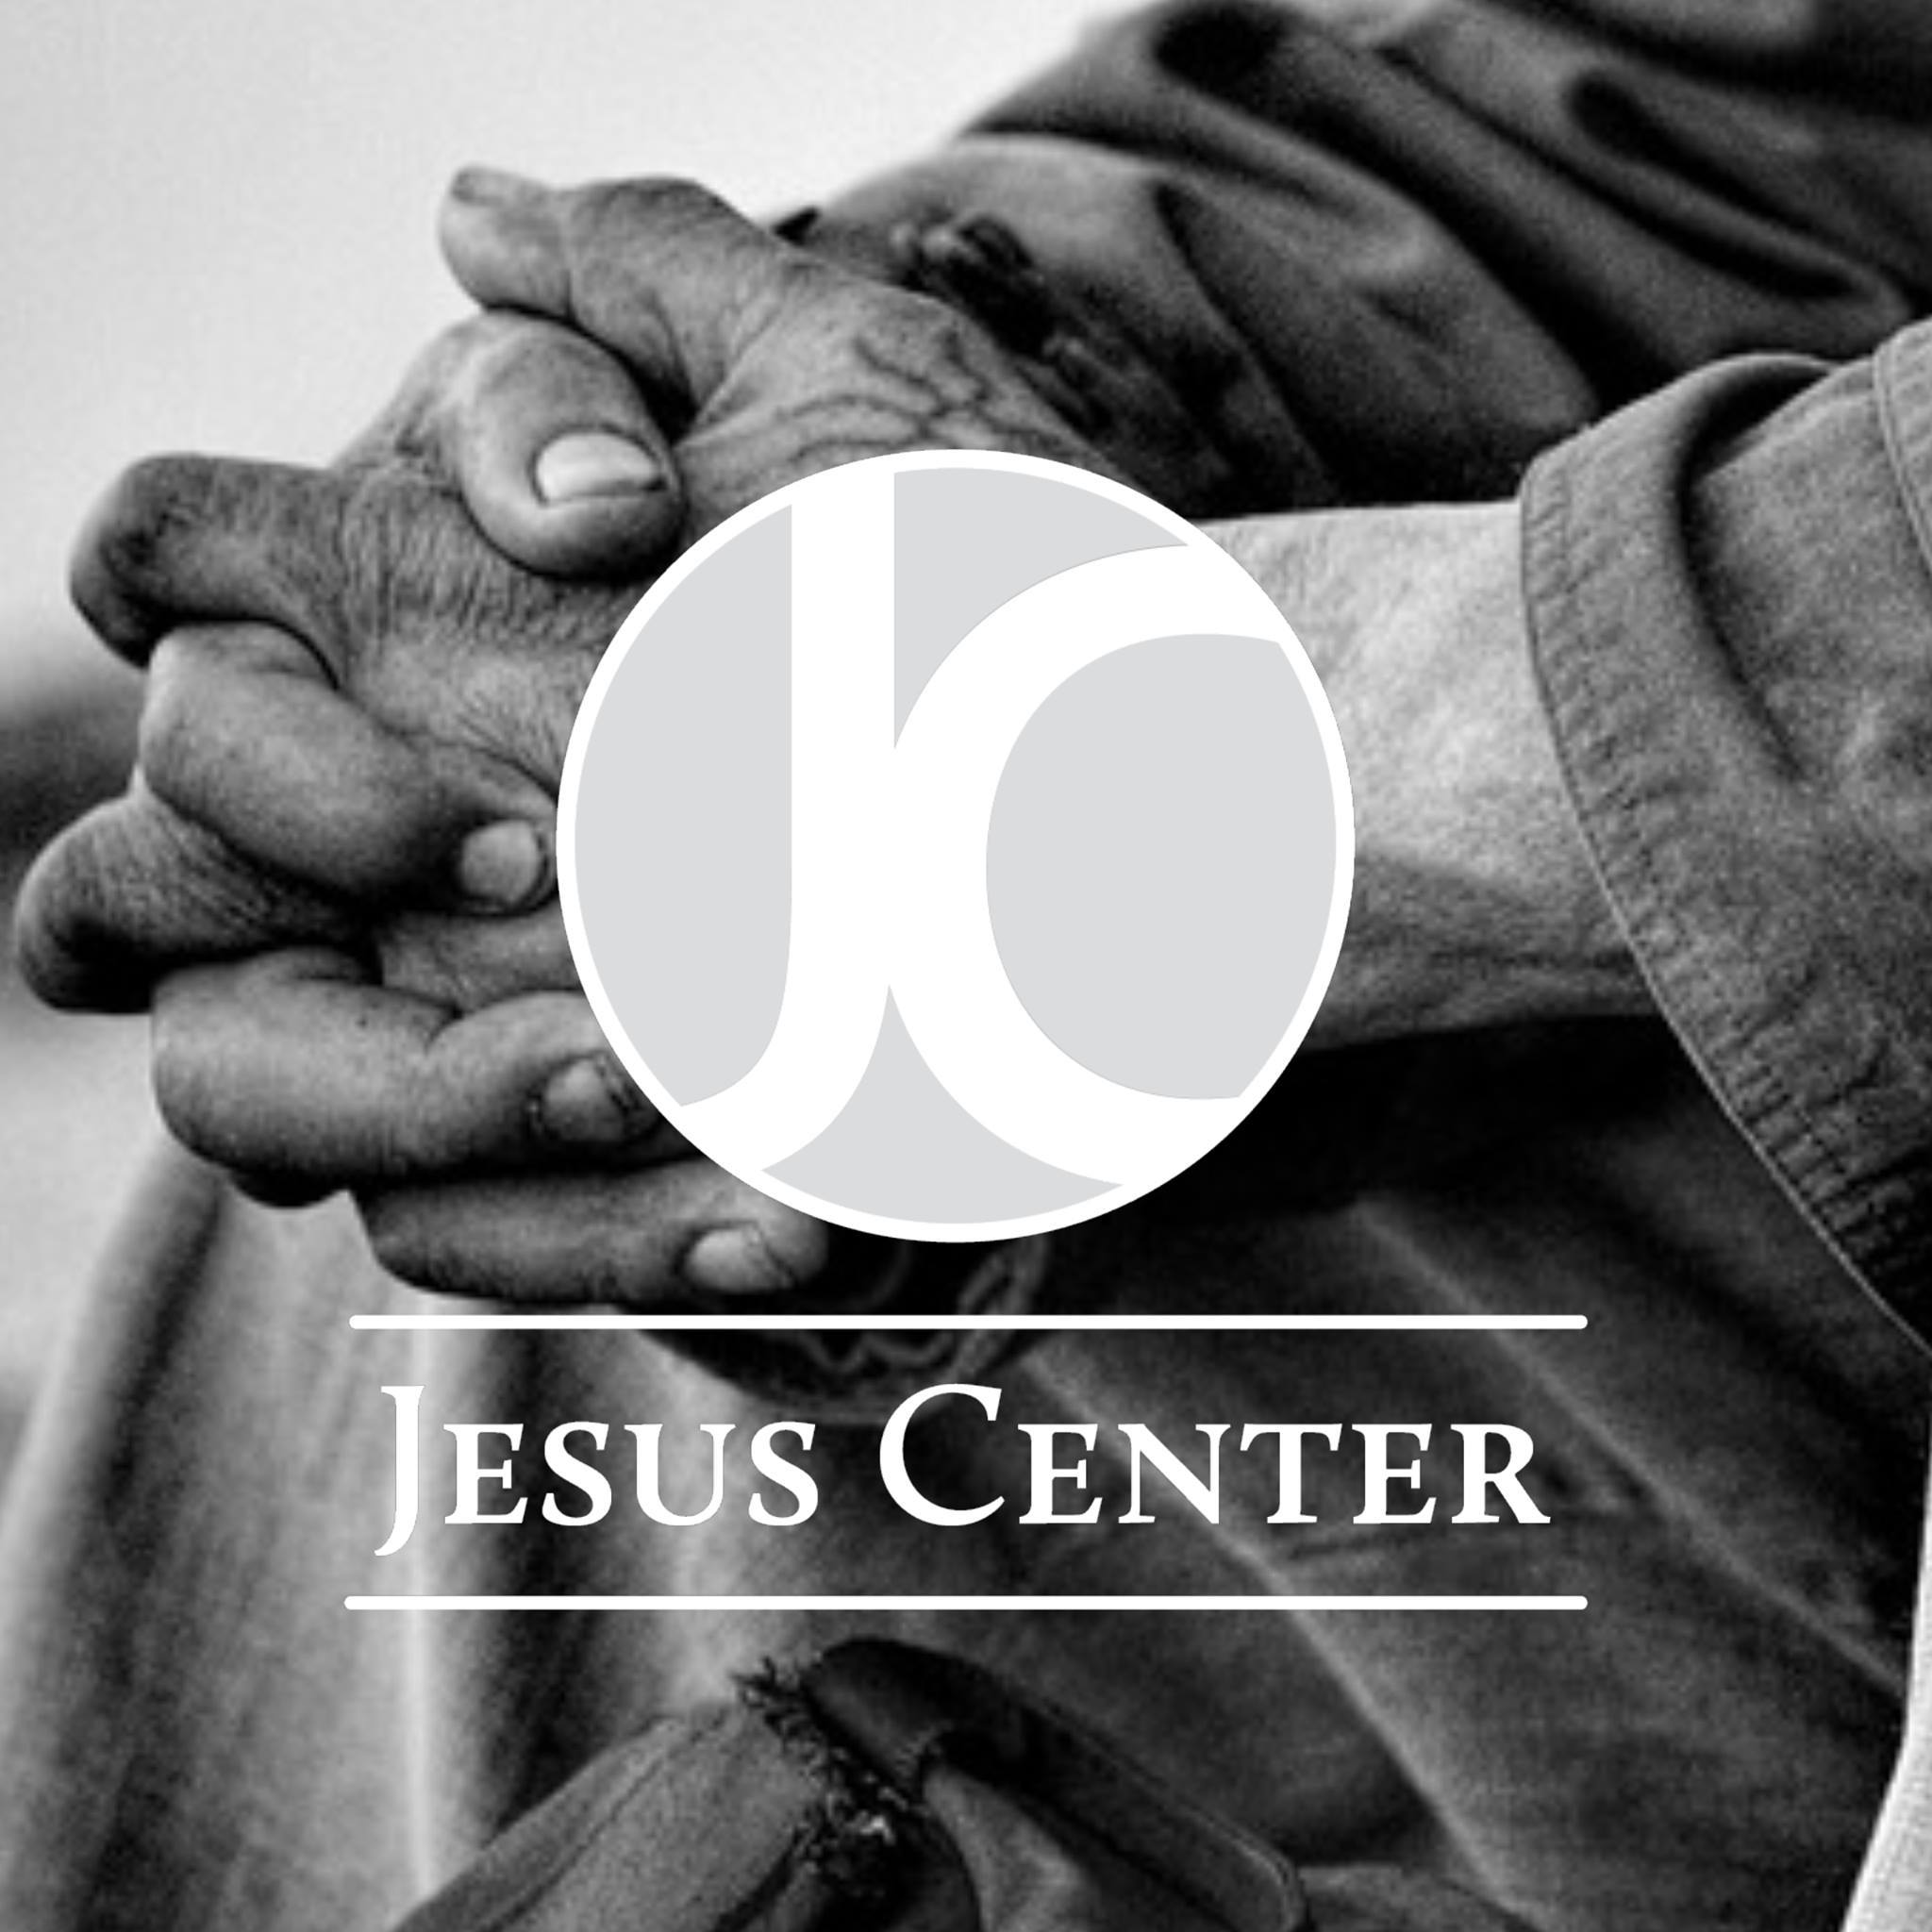 Housing Programs For Qualified People at the Jesus Center